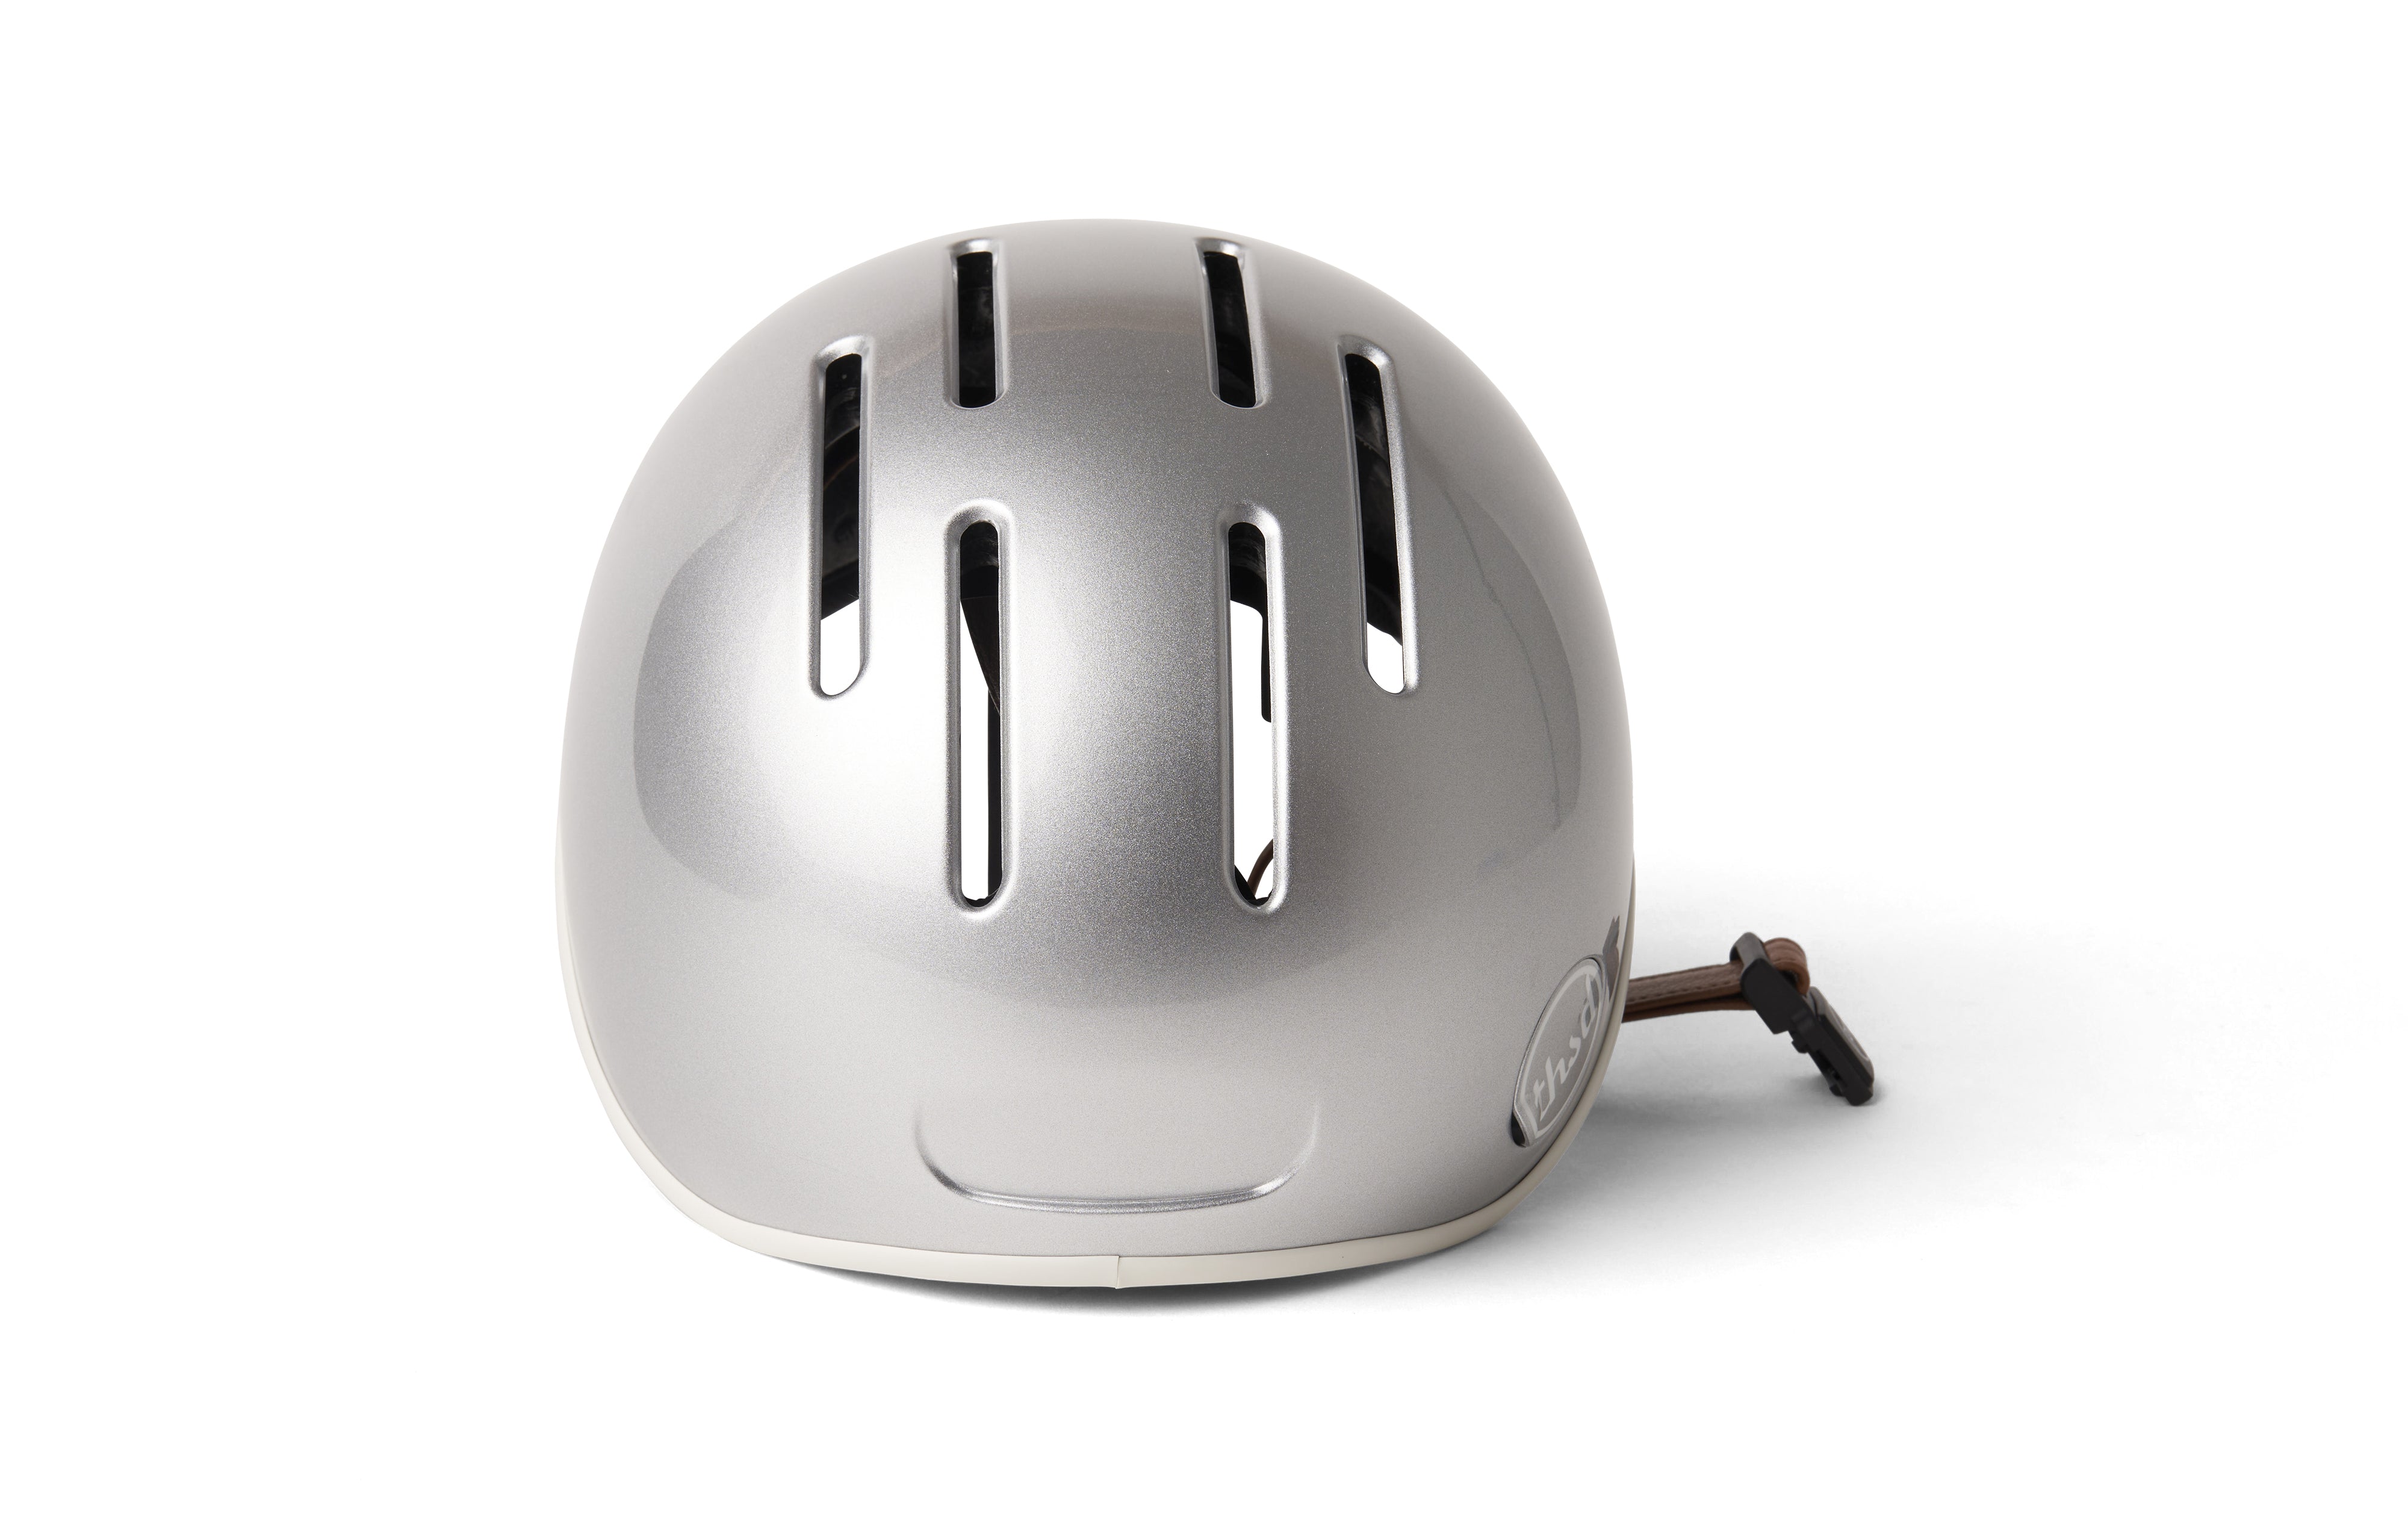 Thousand Heritage electric scooter helmet in so silver